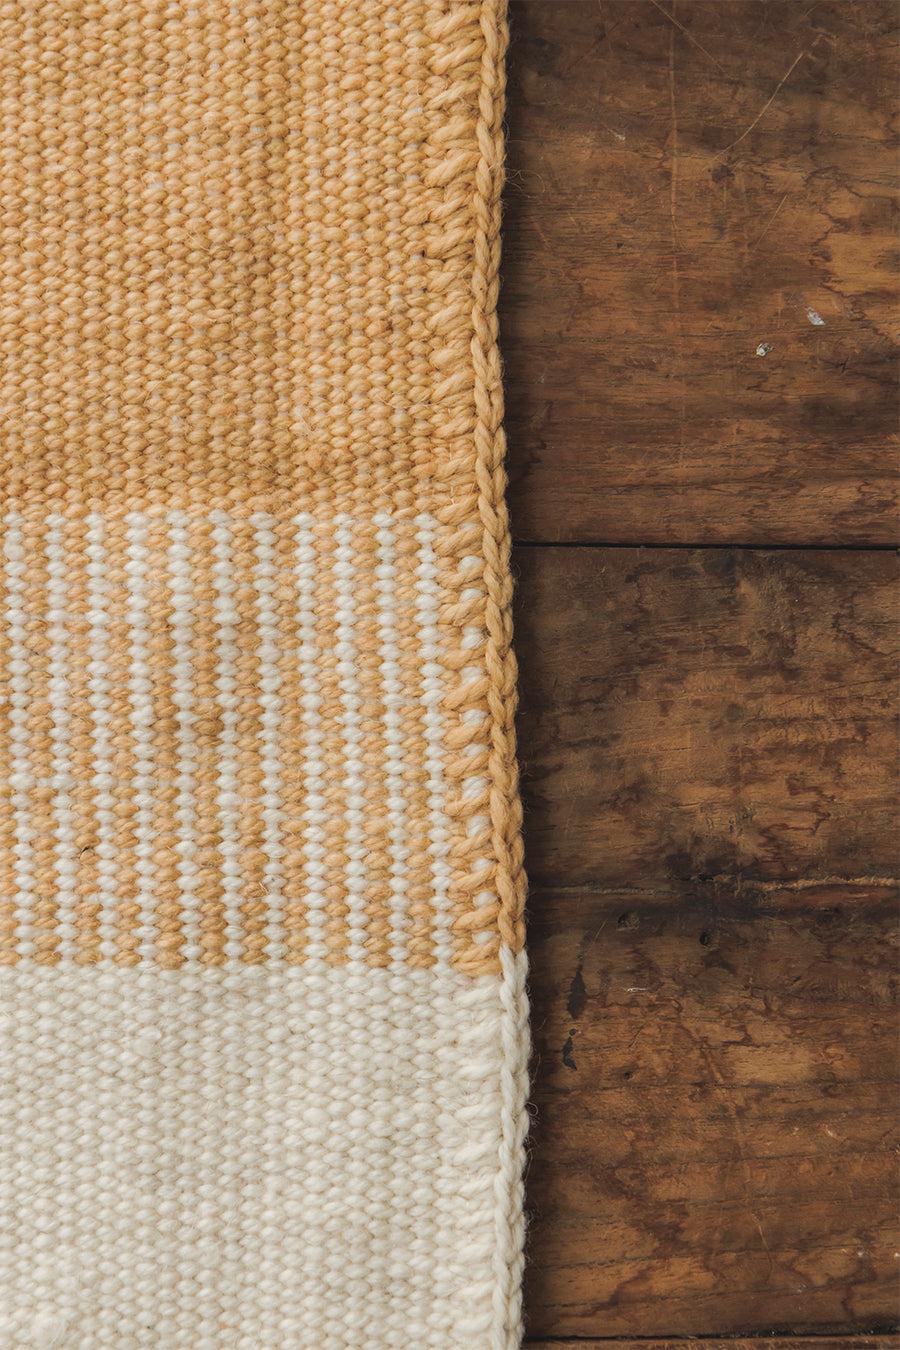 PLENA RUG | MINI #6 SAND & NATURAL-The Andes Project